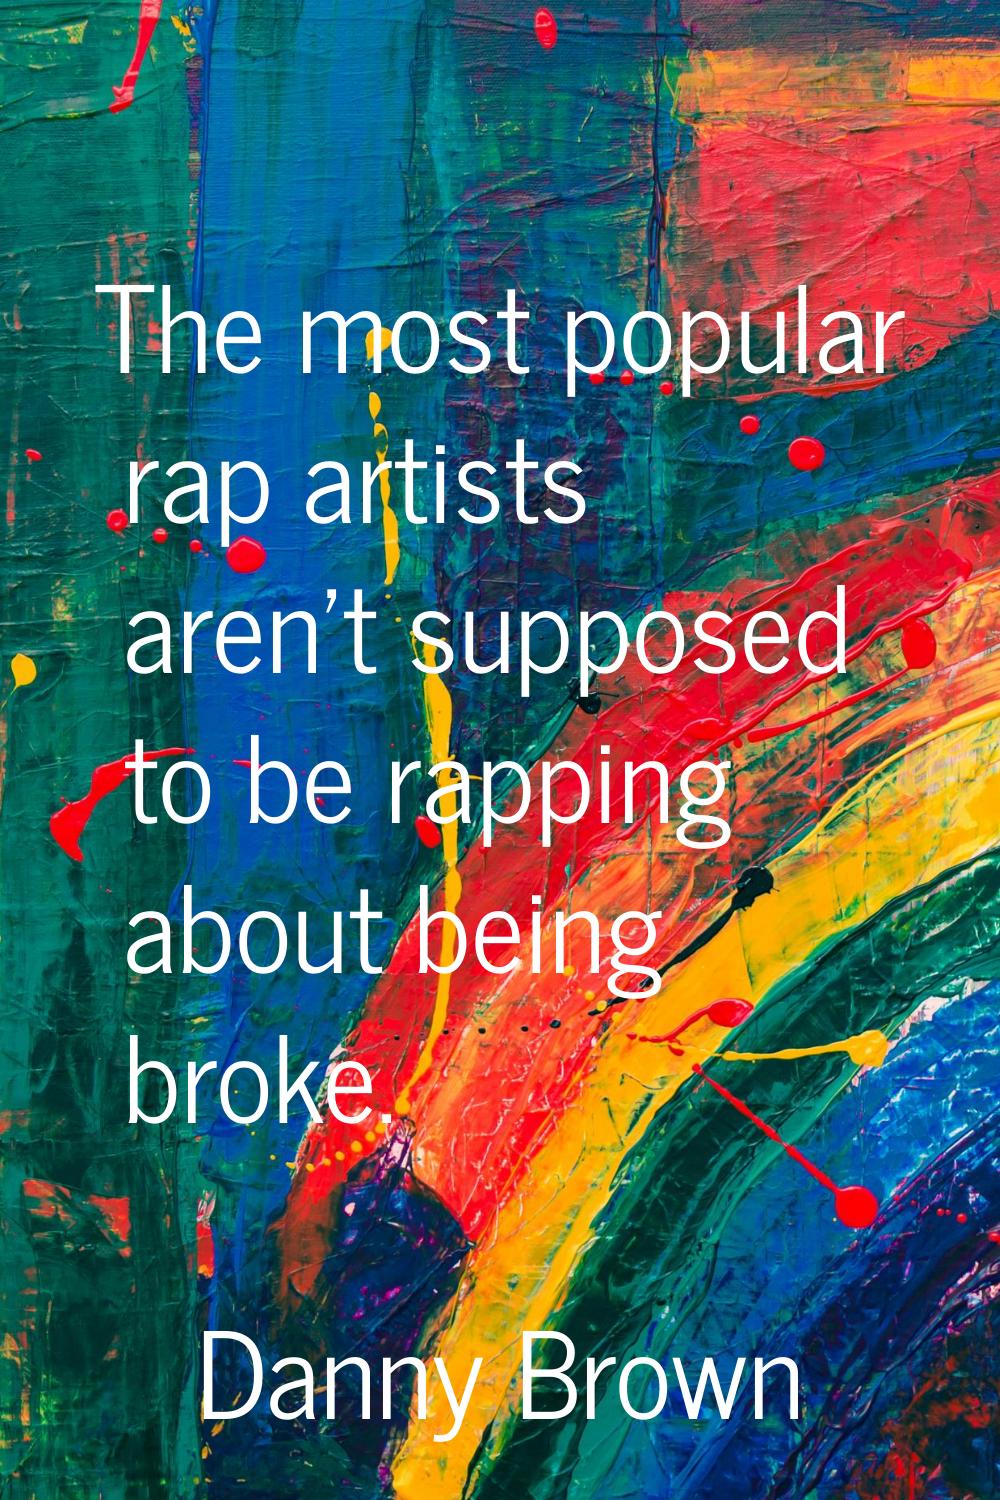 The most popular rap artists aren't supposed to be rapping about being broke.